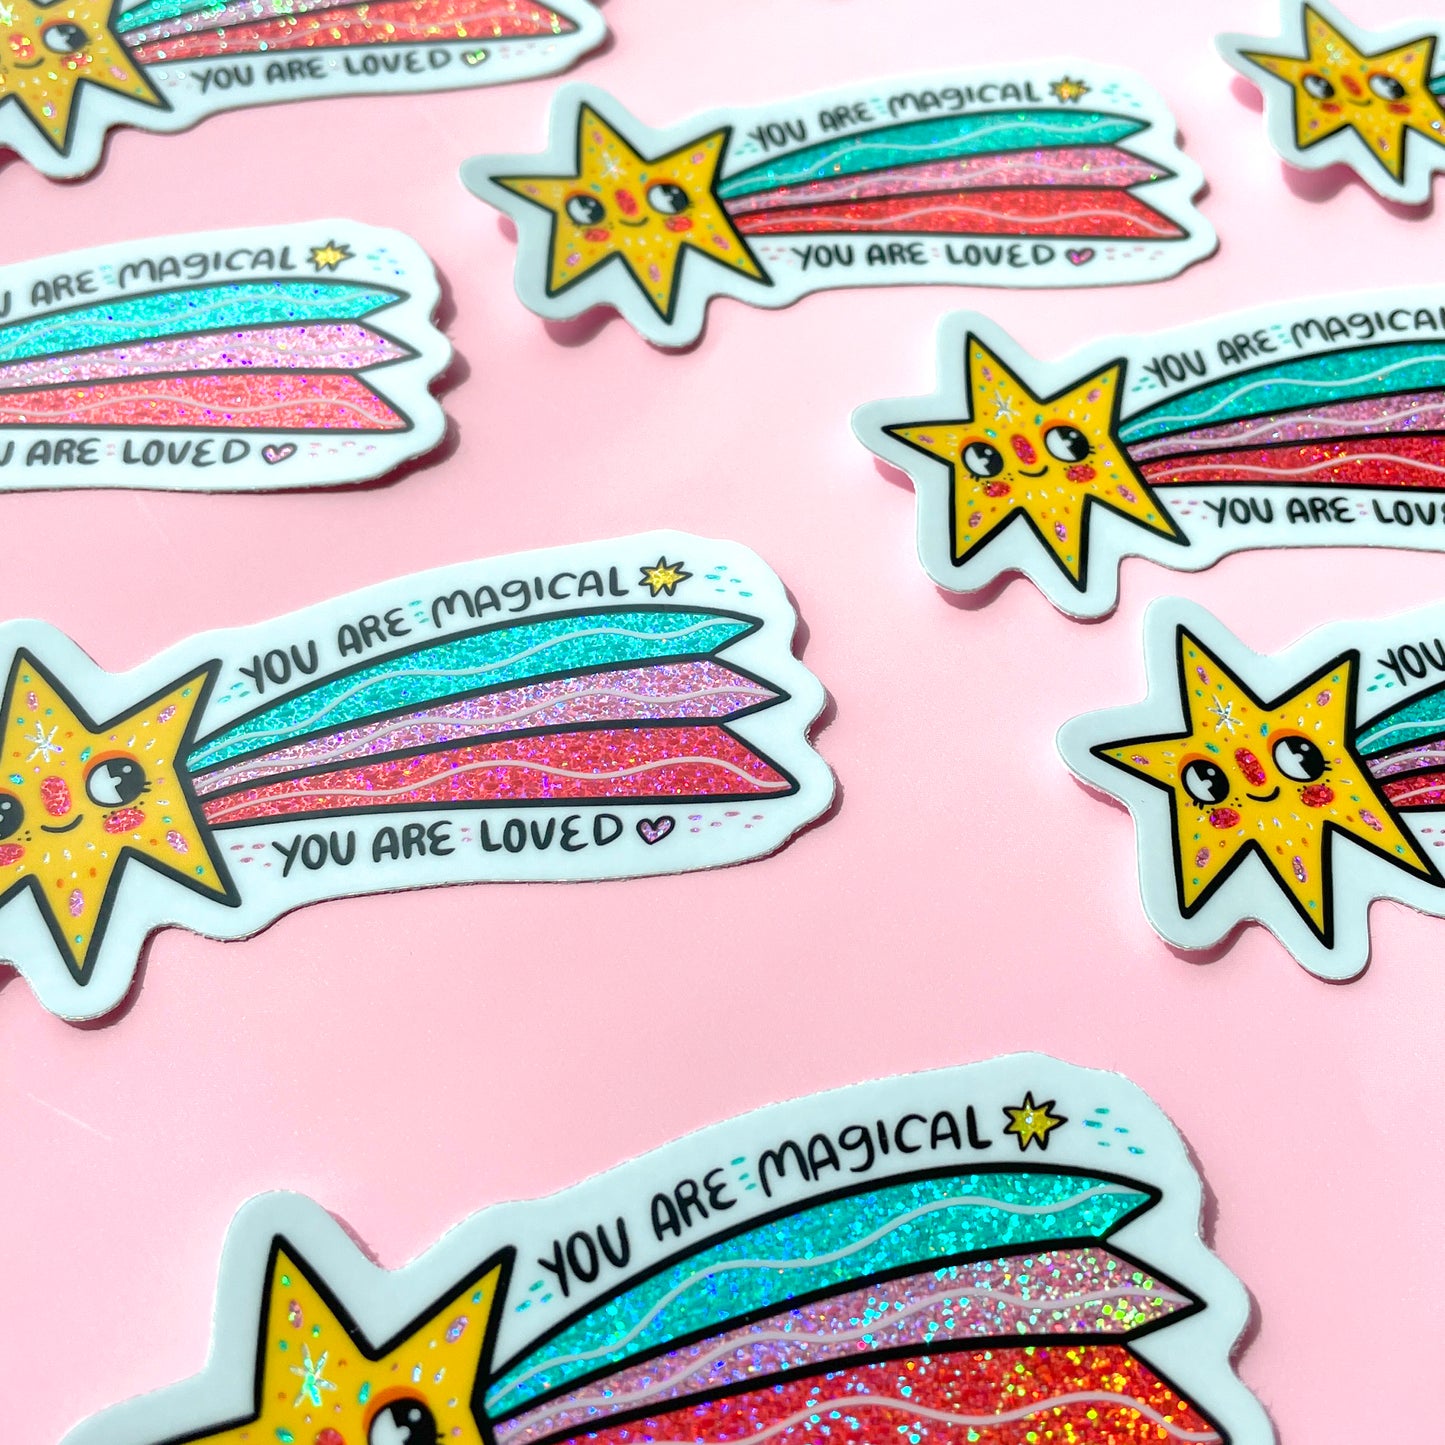 You are Magical ✷Shimmery Sticker✷